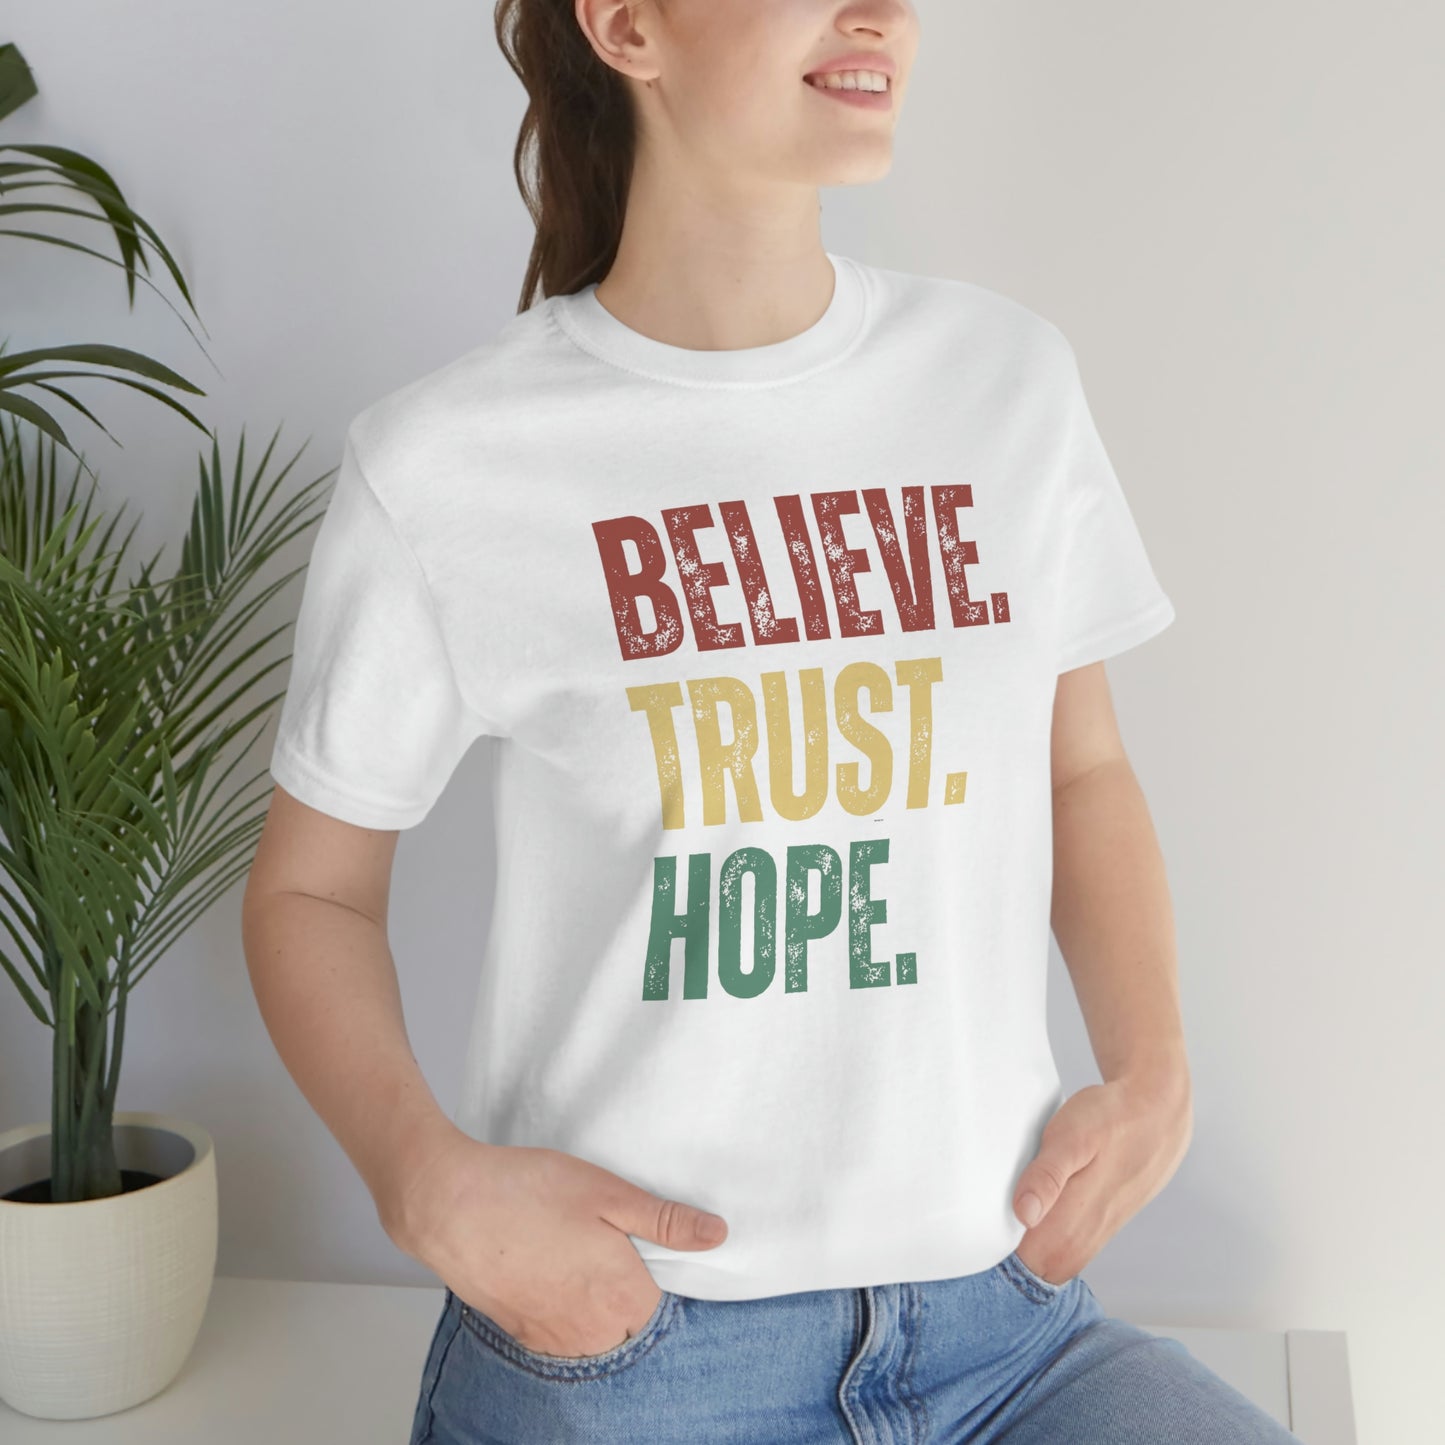 Unisex Jersey Short Sleeve Tee, Believe, Trust, Hope T-Shirt, LDS Youth, Relief Society, Retro t-shirt